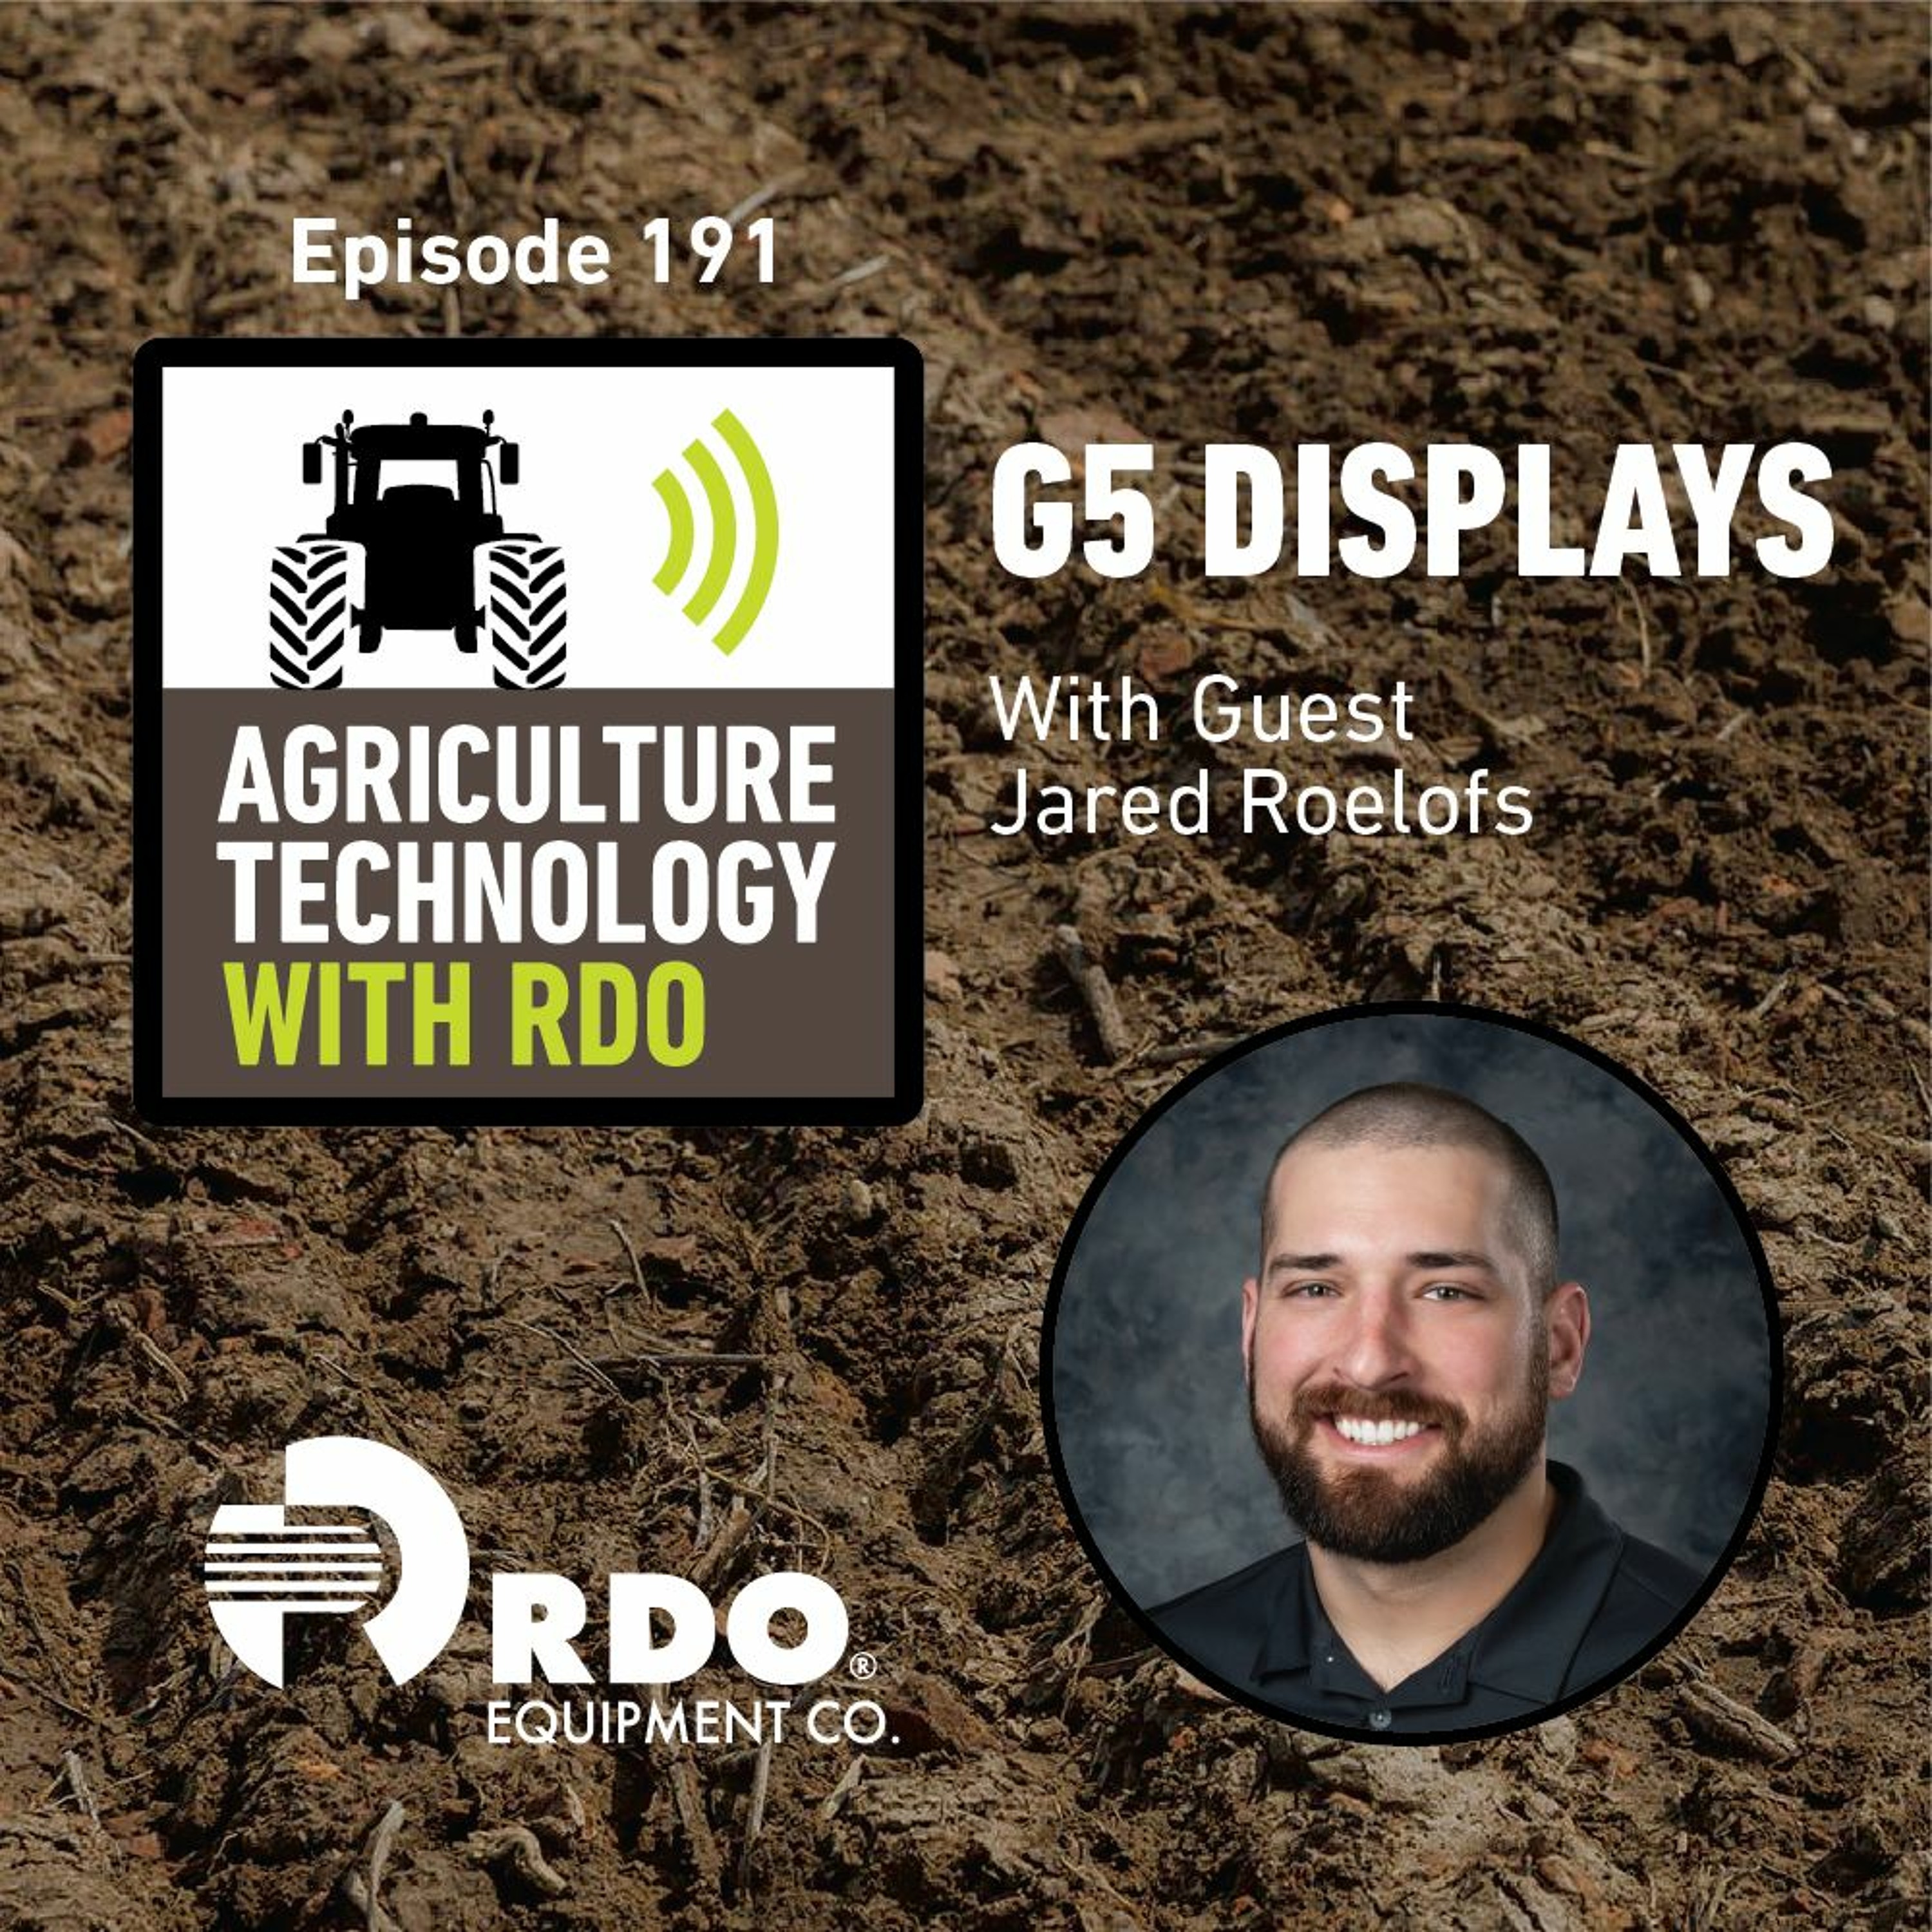 Ep. 191 - G5 Displays with Guest Jared Roelofs